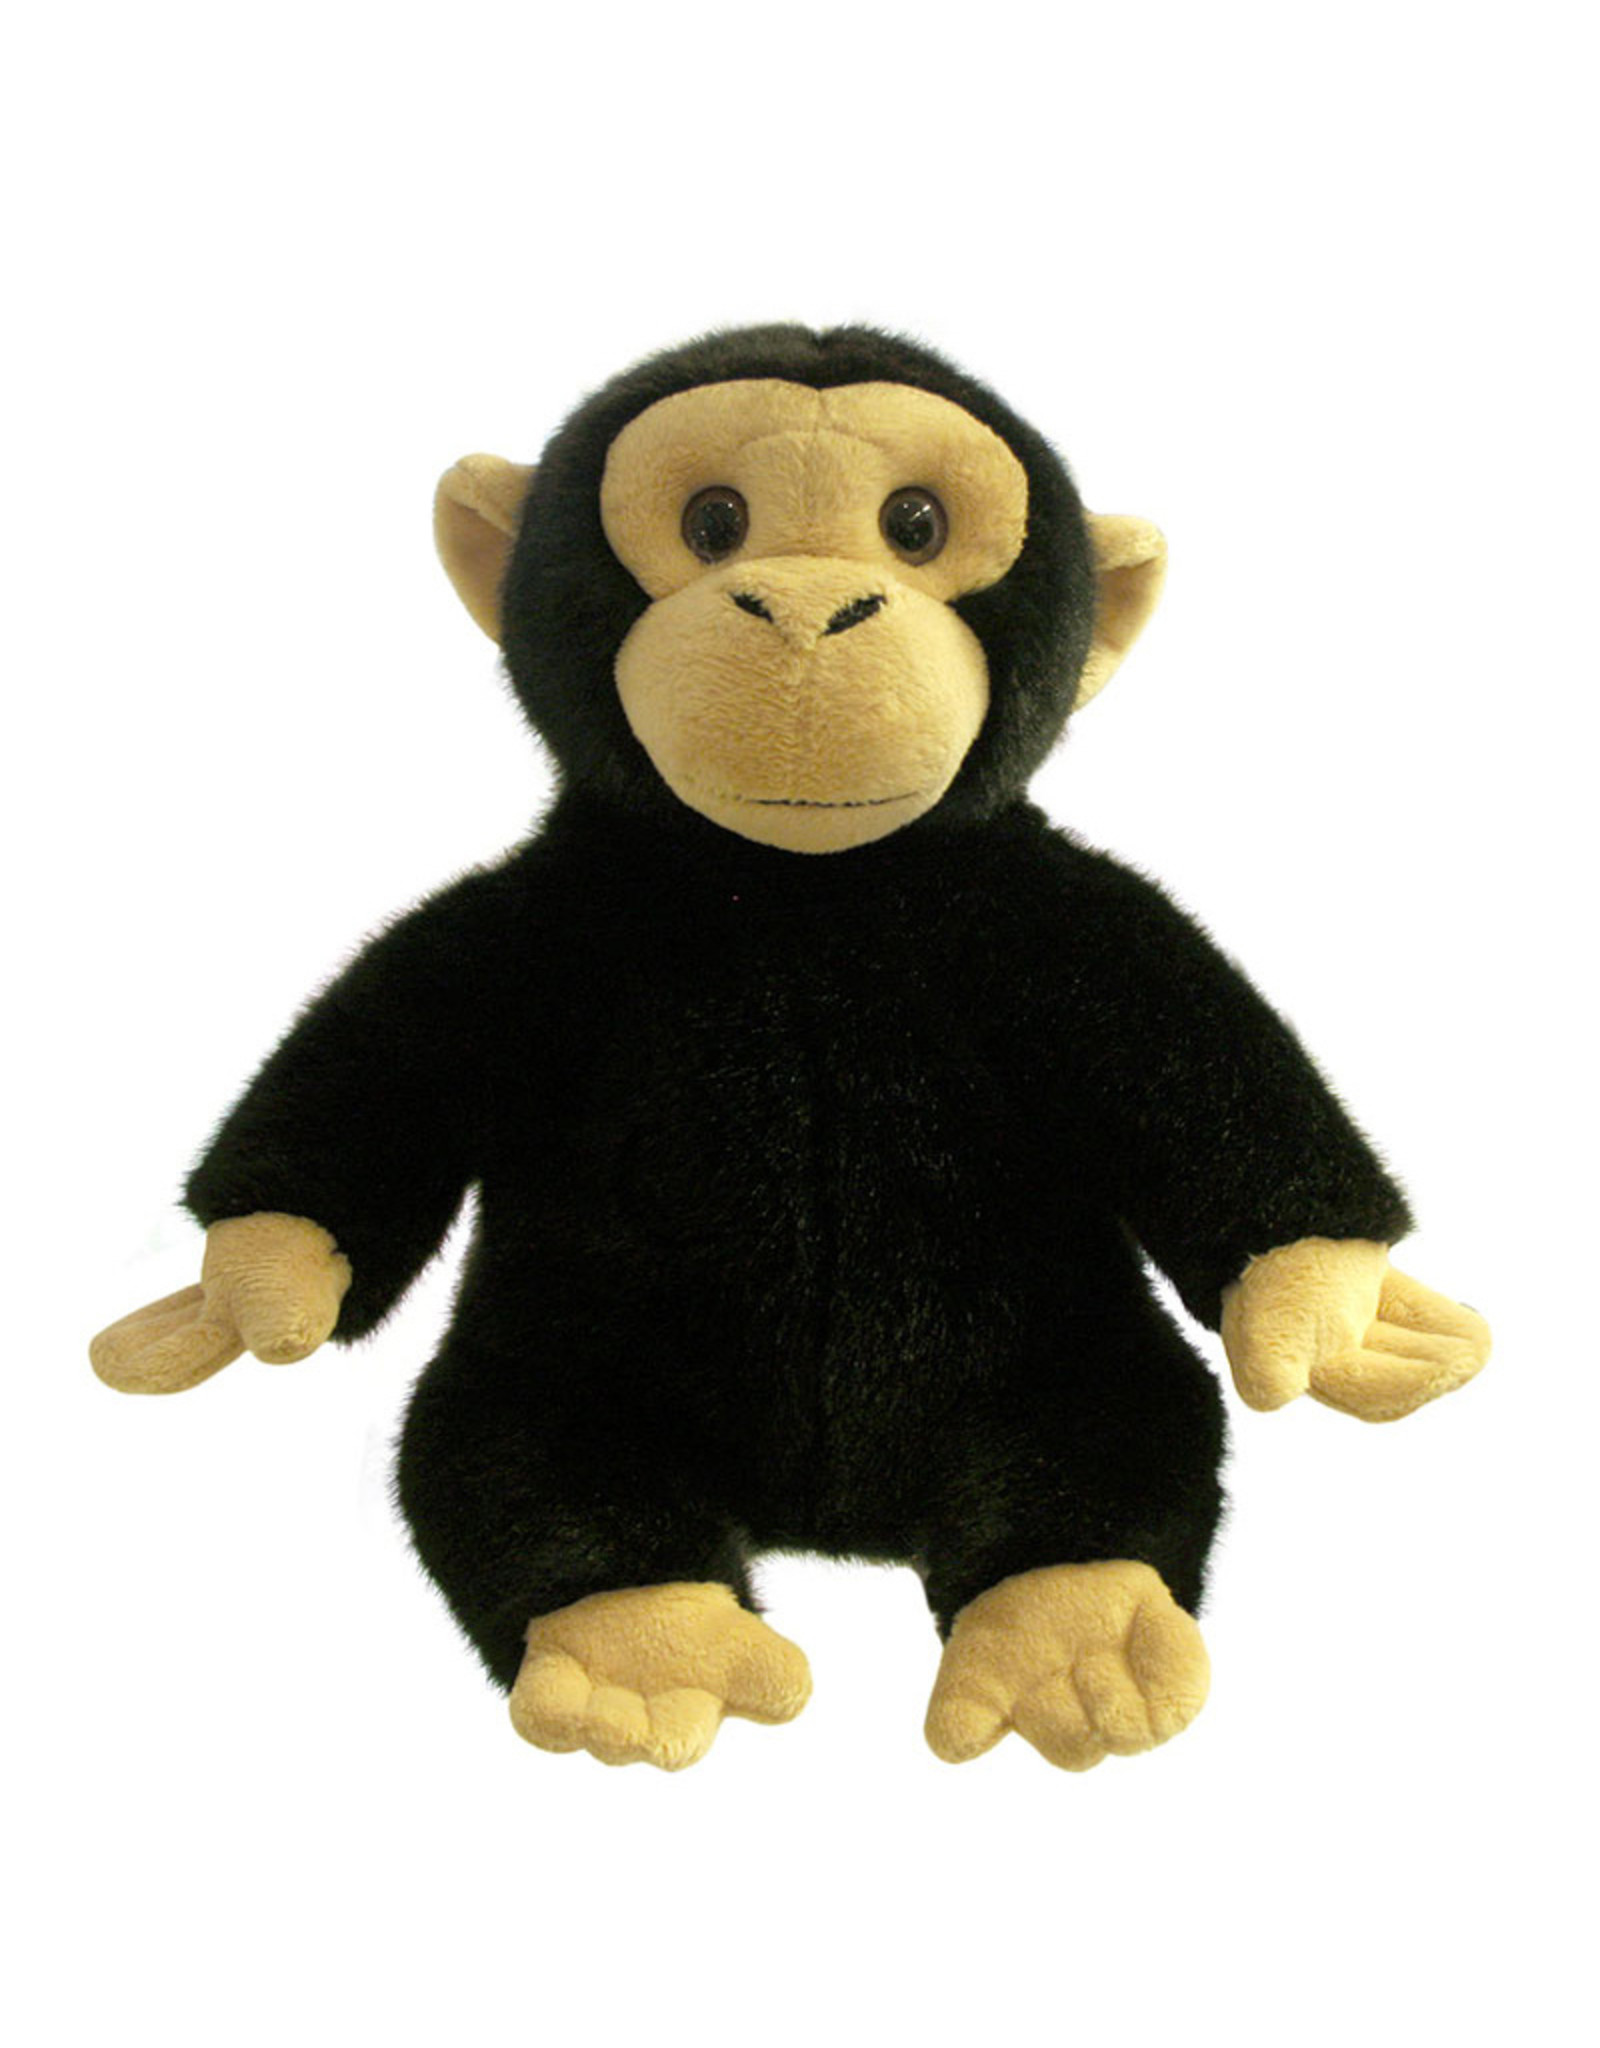 The Puppet Company Ltd Full-Bodied Puppets: Chimp